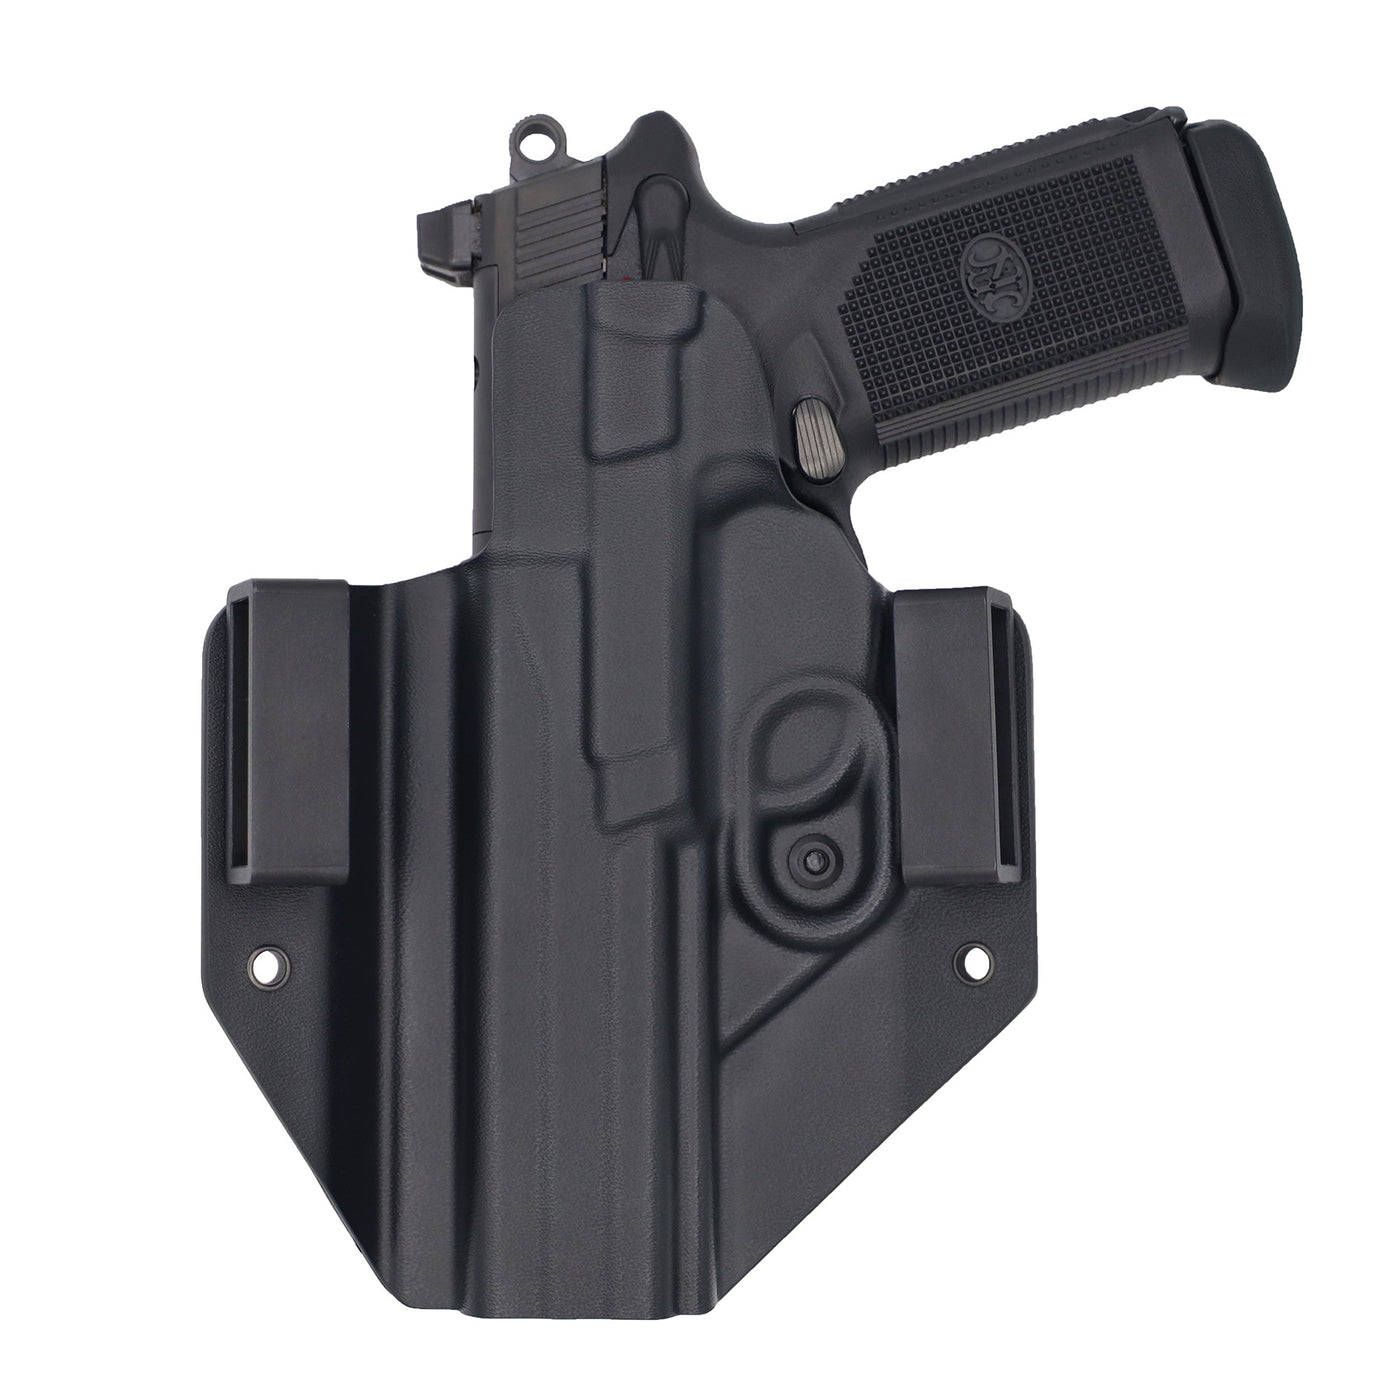 This is the rear of the C&G Holsters outside the waistband Covert series holster for the FNH FNX45T with the gun